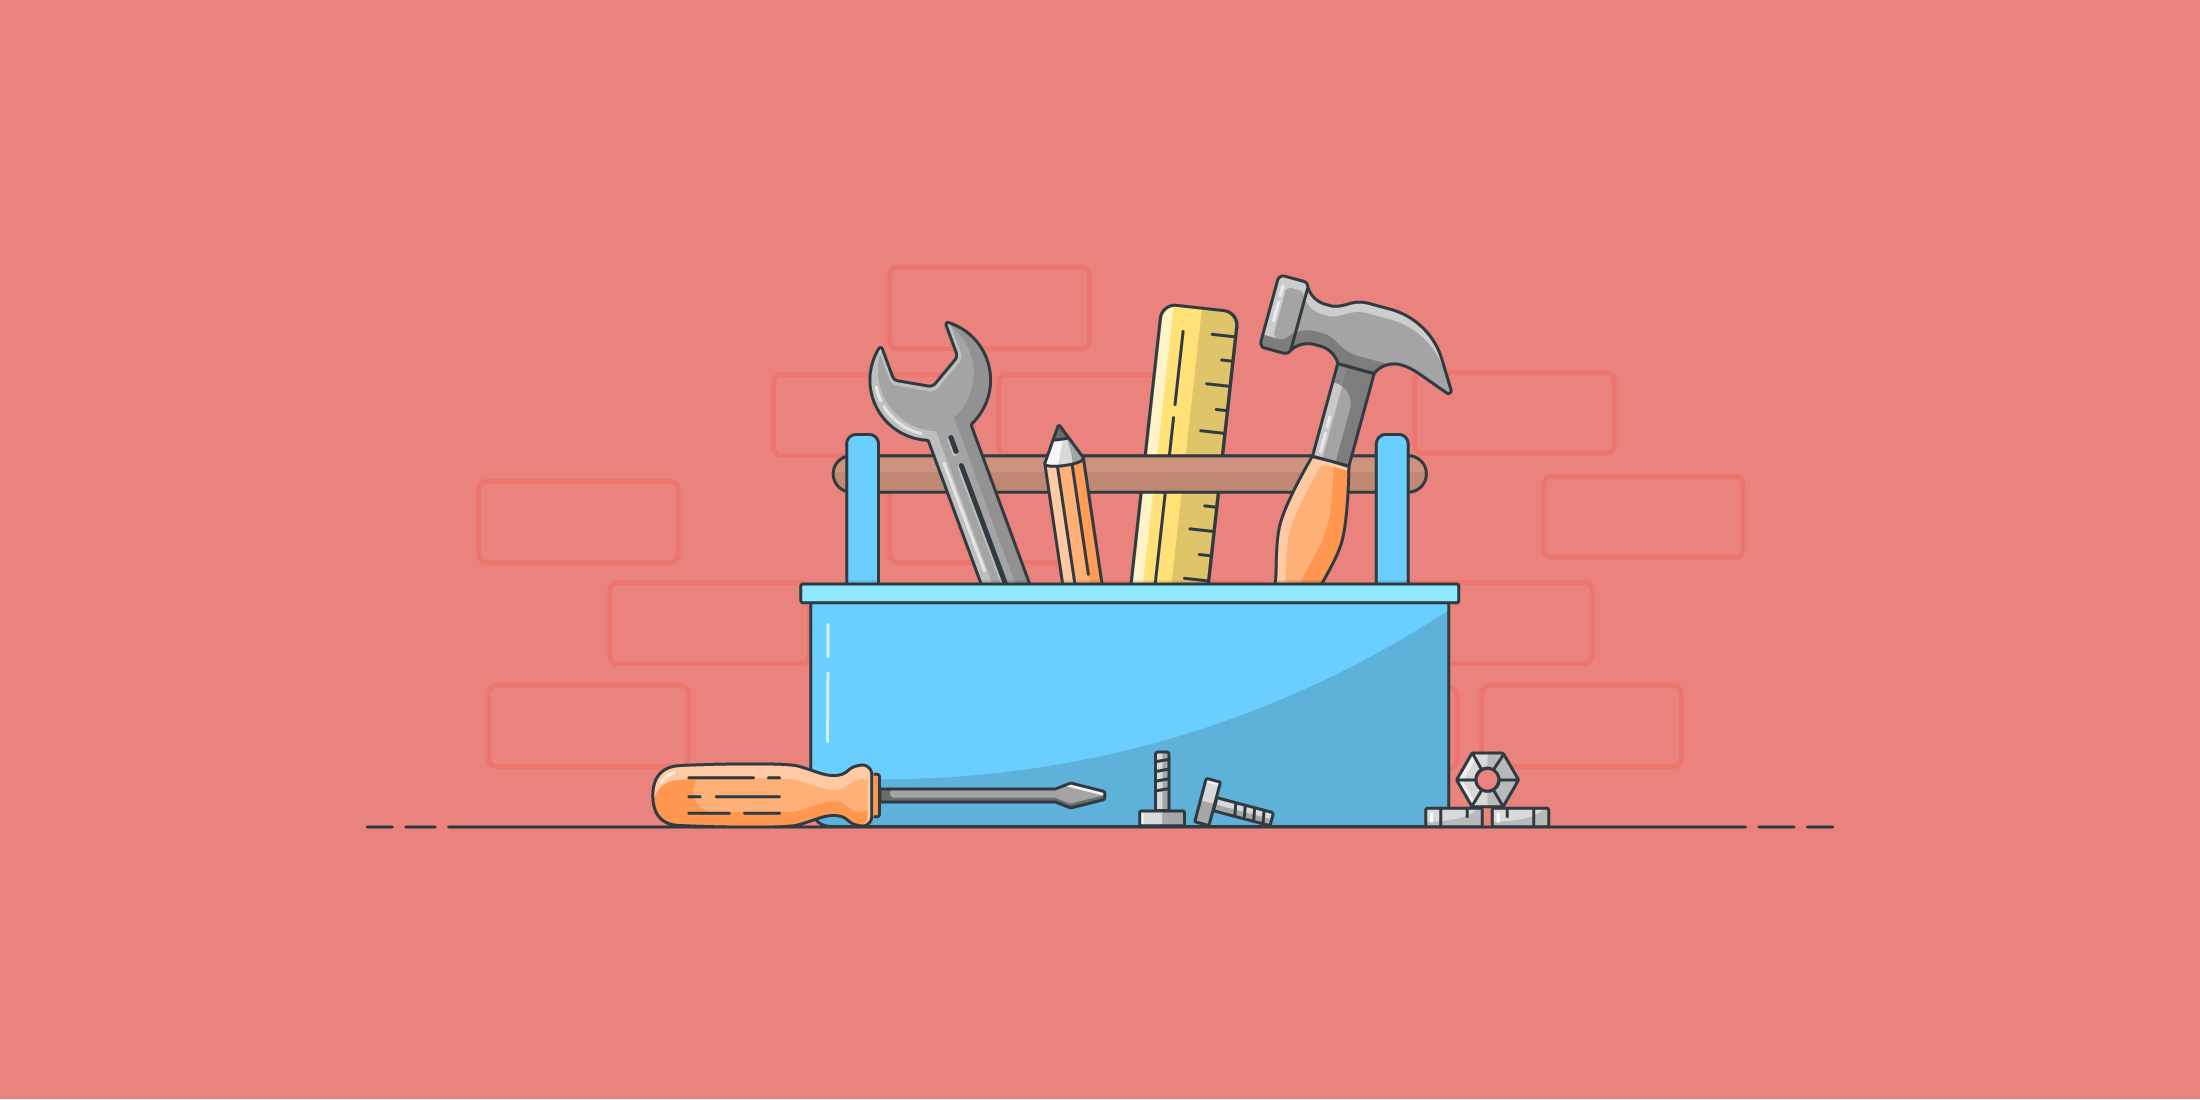 Our favorite tools for running an eCommerce business